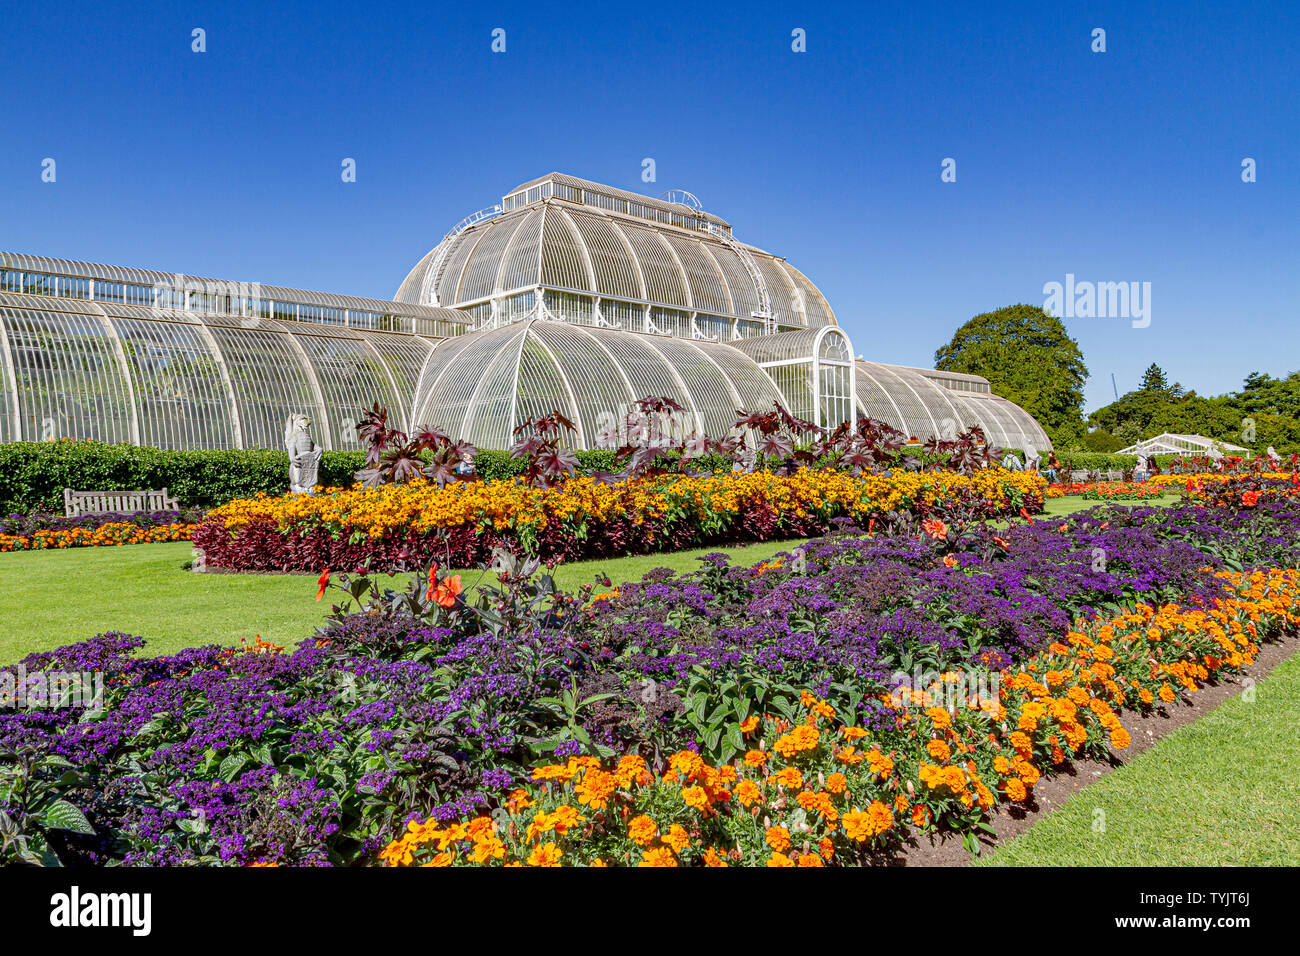 Flower beds in front of the The Palm House At The Royal Botanic Gardens, Kew , London .UK Stock Photo